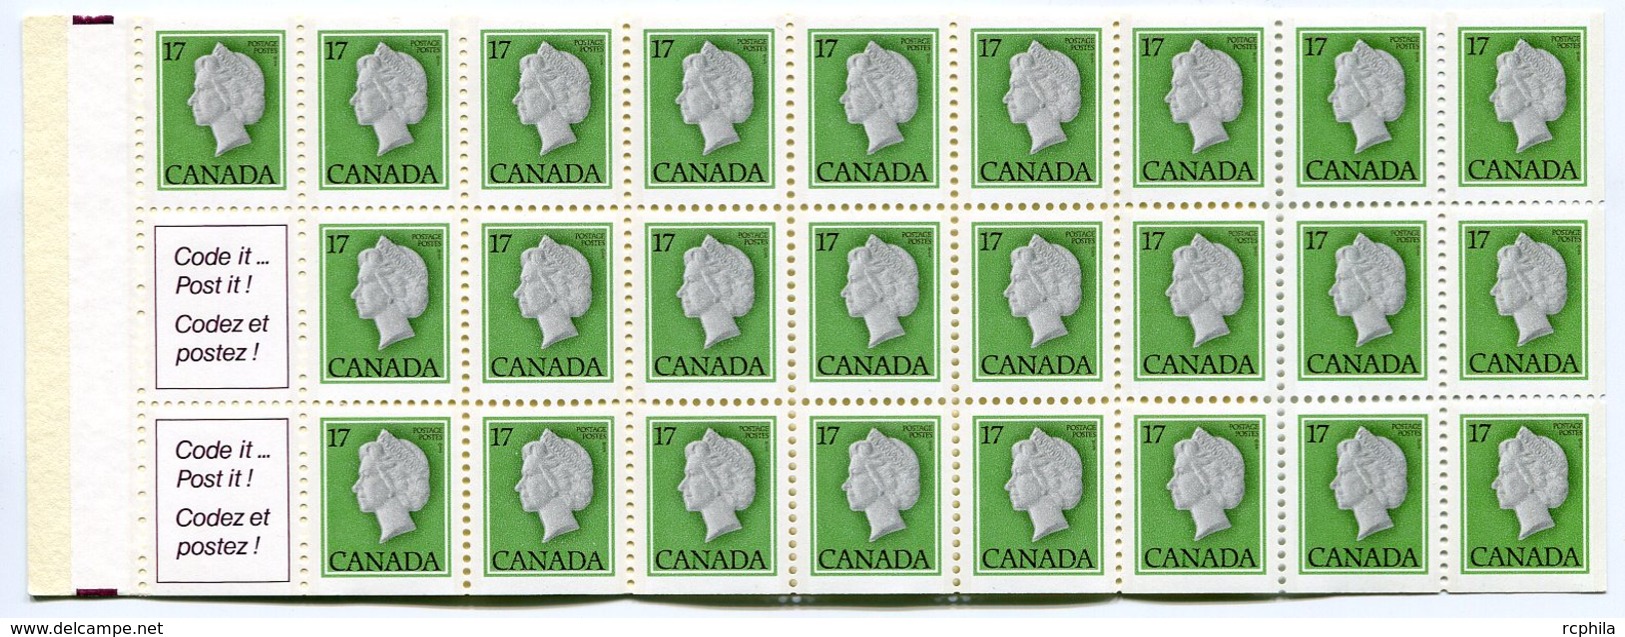 RC 15932 CANADA BK81 PARLIAMENT ISSUE CARNET COMPLET BOOKLET MNH NEUF ** - Libretti Completi